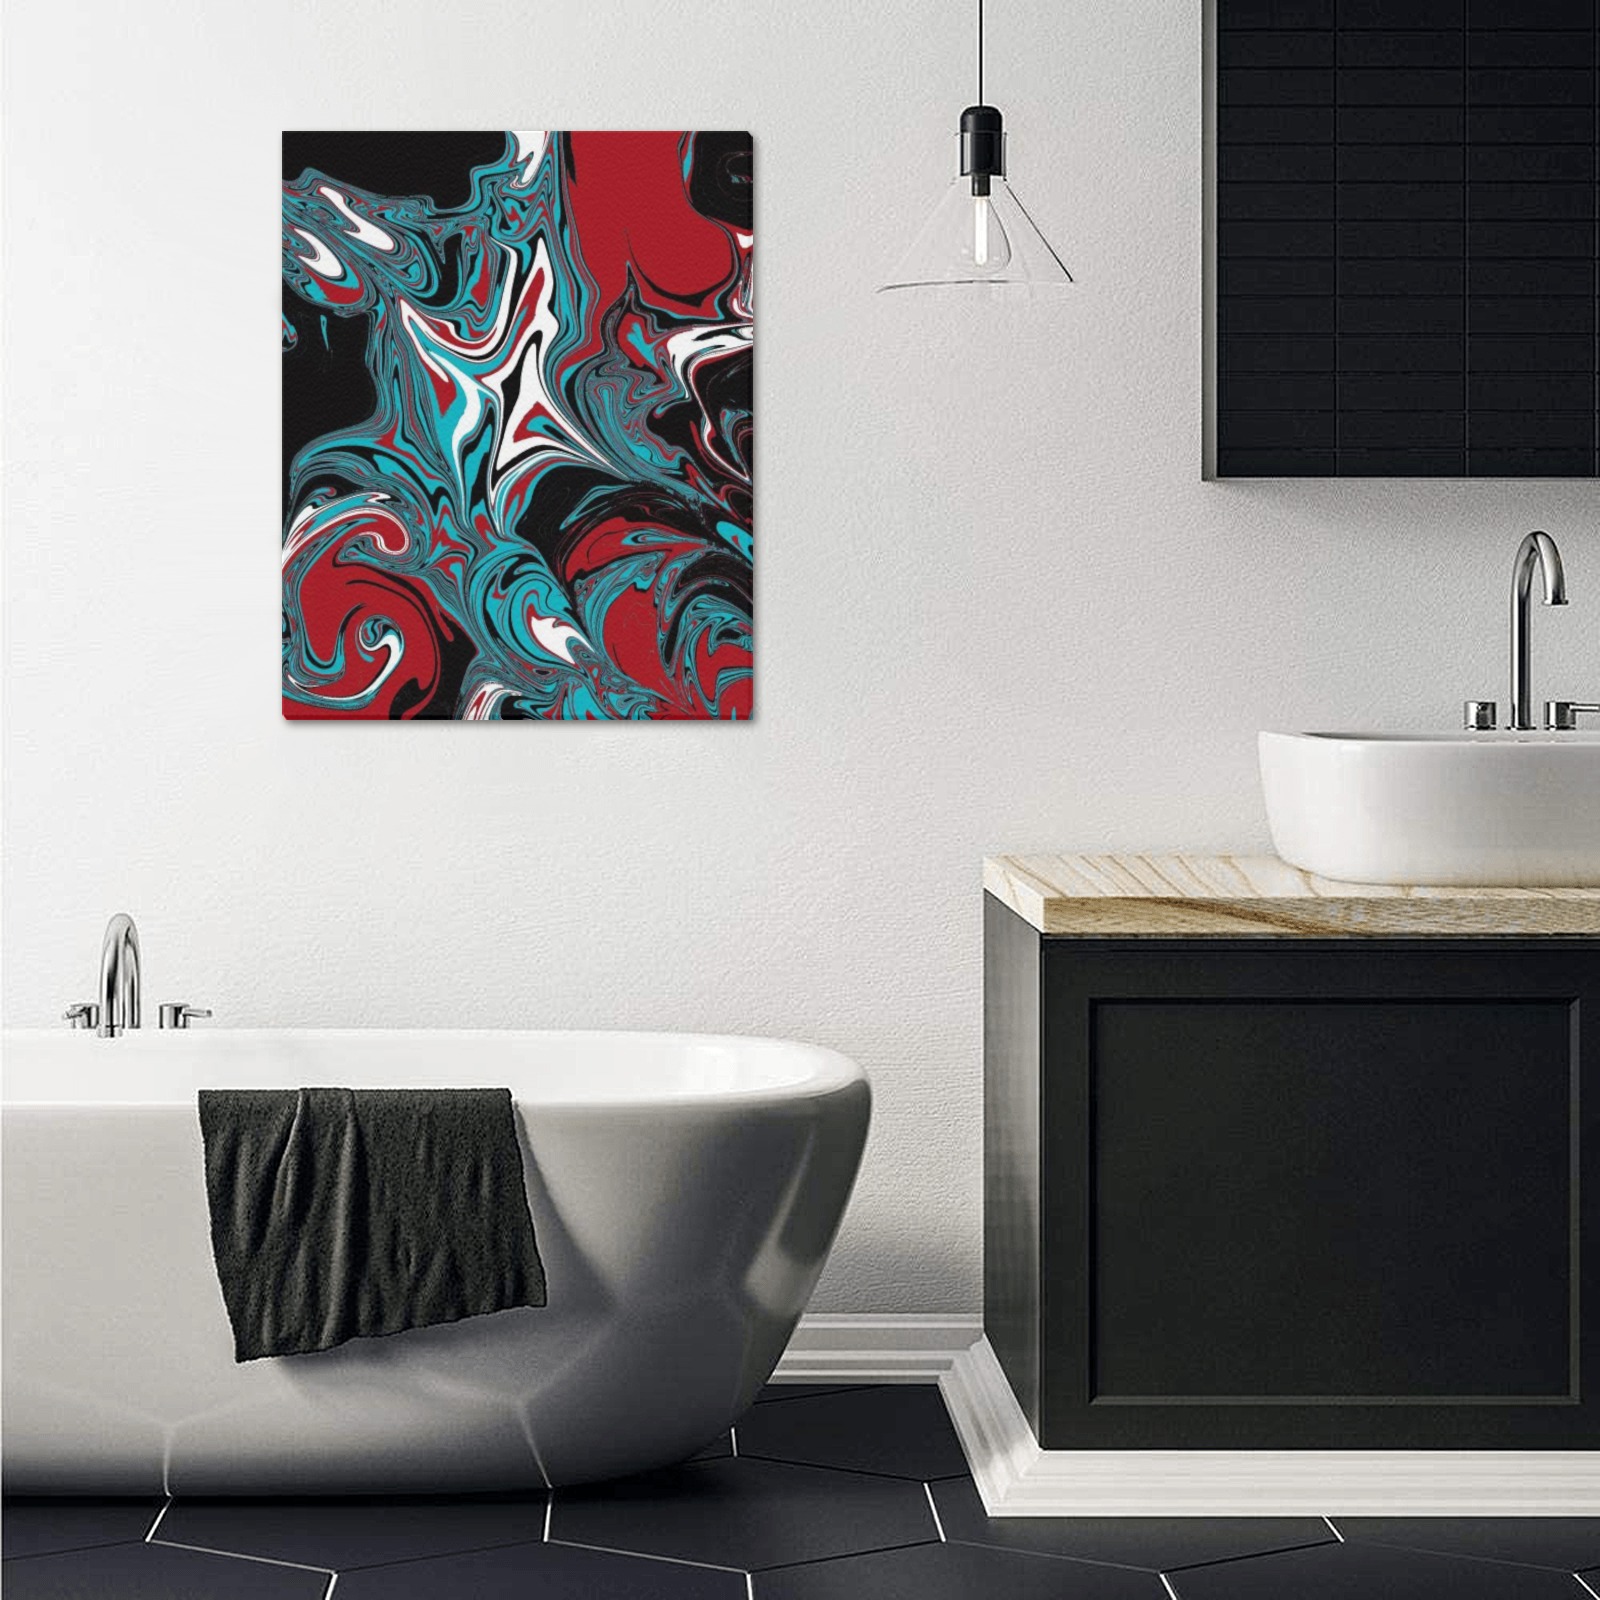 Dark Wave of Colors Frame Canvas Print 16"x20"